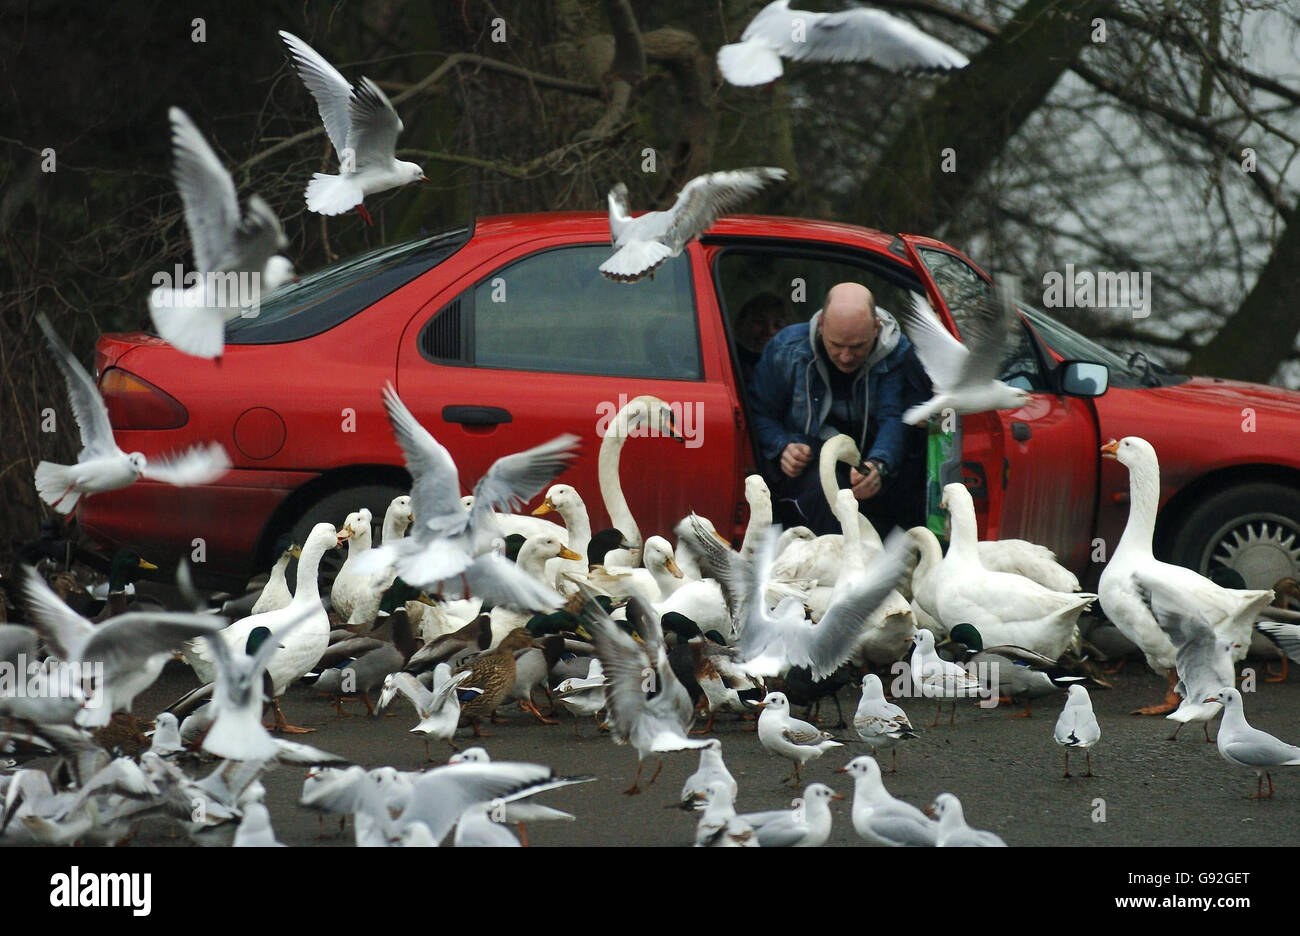 Members of the public feeding wild birds at Fairburn Ings near Leeds after the spread of bird flu in Turkey has significantly raised the possibility that the virus will eventually reach Britain, experts warned today. Stock Photo